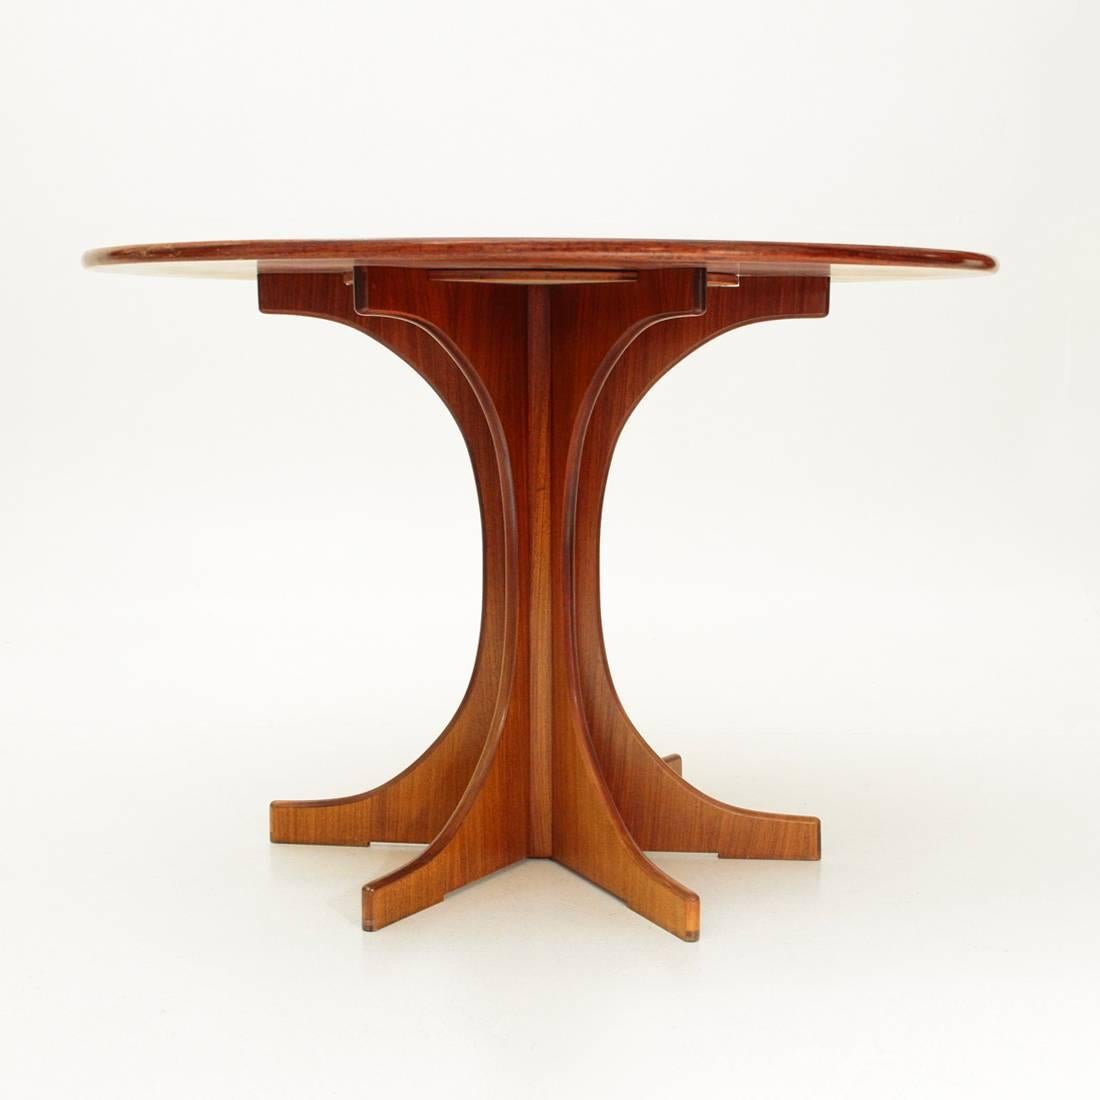 Italian table of production of the 1960s.
Top and leg in veneered wood.
Circular shaped top with rounded edge.
Radiating legs.
Good general conditions, some signs due to normal use over time.

Dimensions: Diameter 110 cm, height 77 cm.